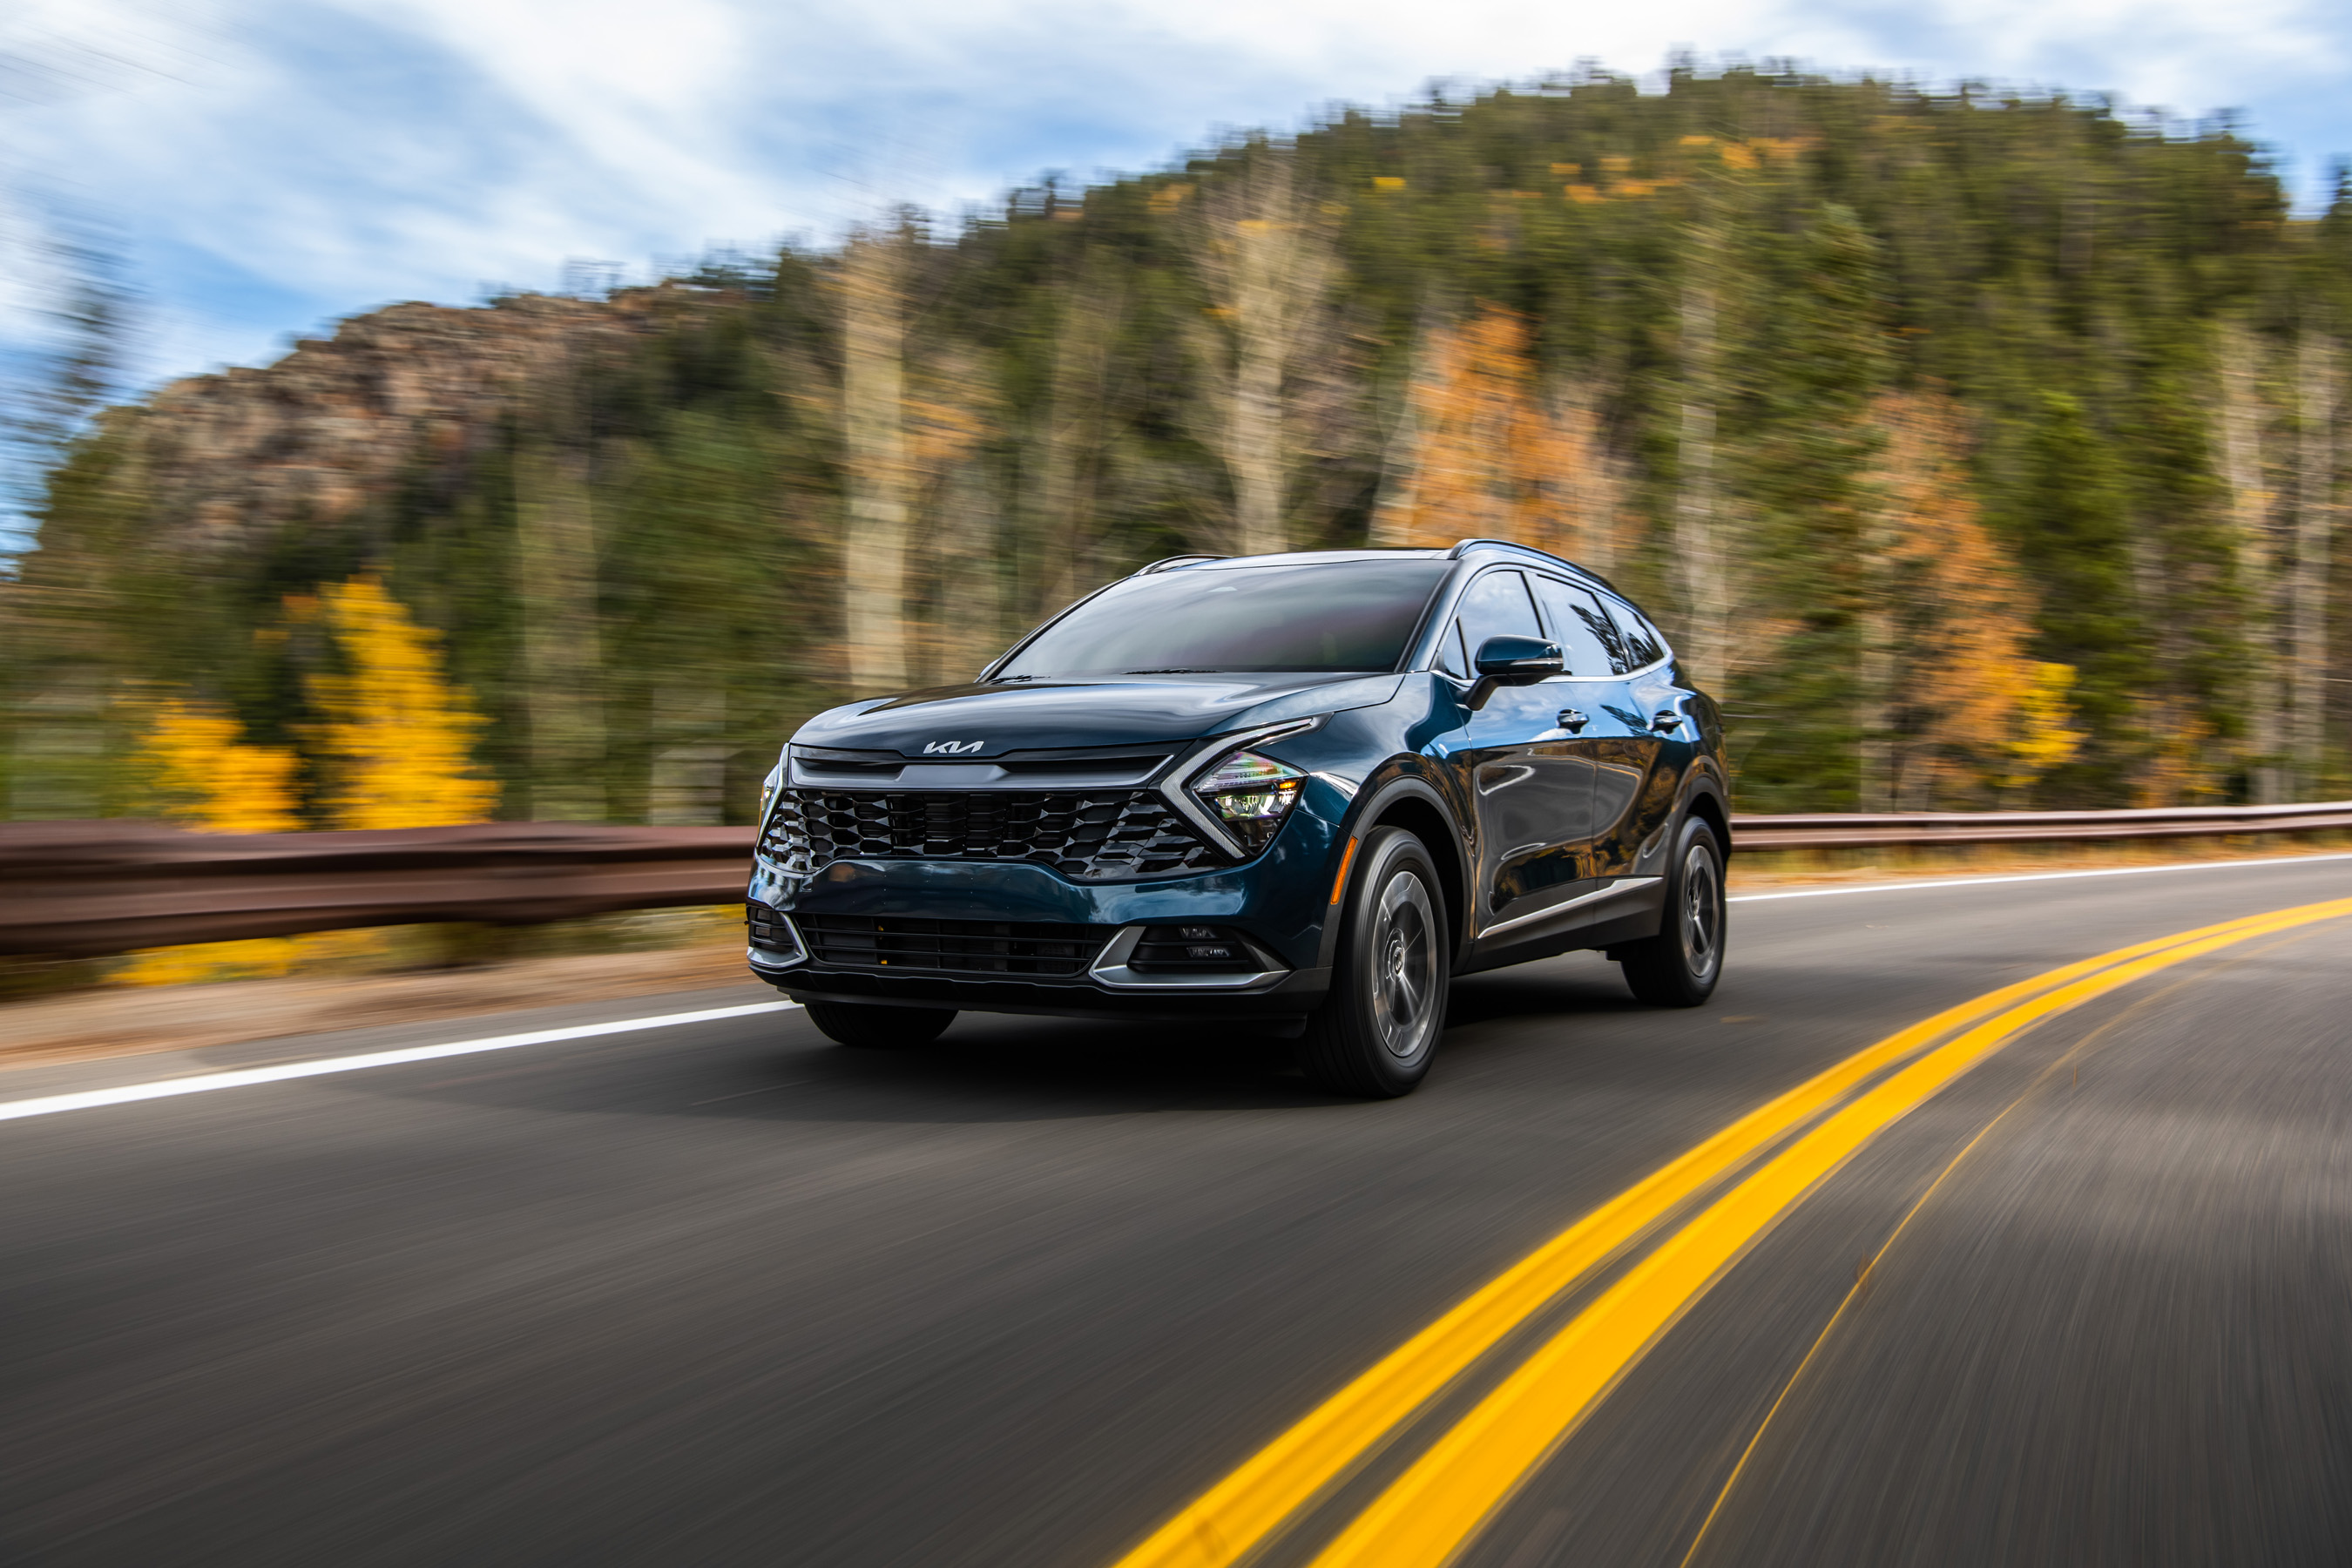 Sportage Hybrid will deliver an ideal mix of fuel efficiency and power, delivering 226 hp from its turbocharged engine, up to 39 MPG (targeted) and more than 500 miles of driving range.